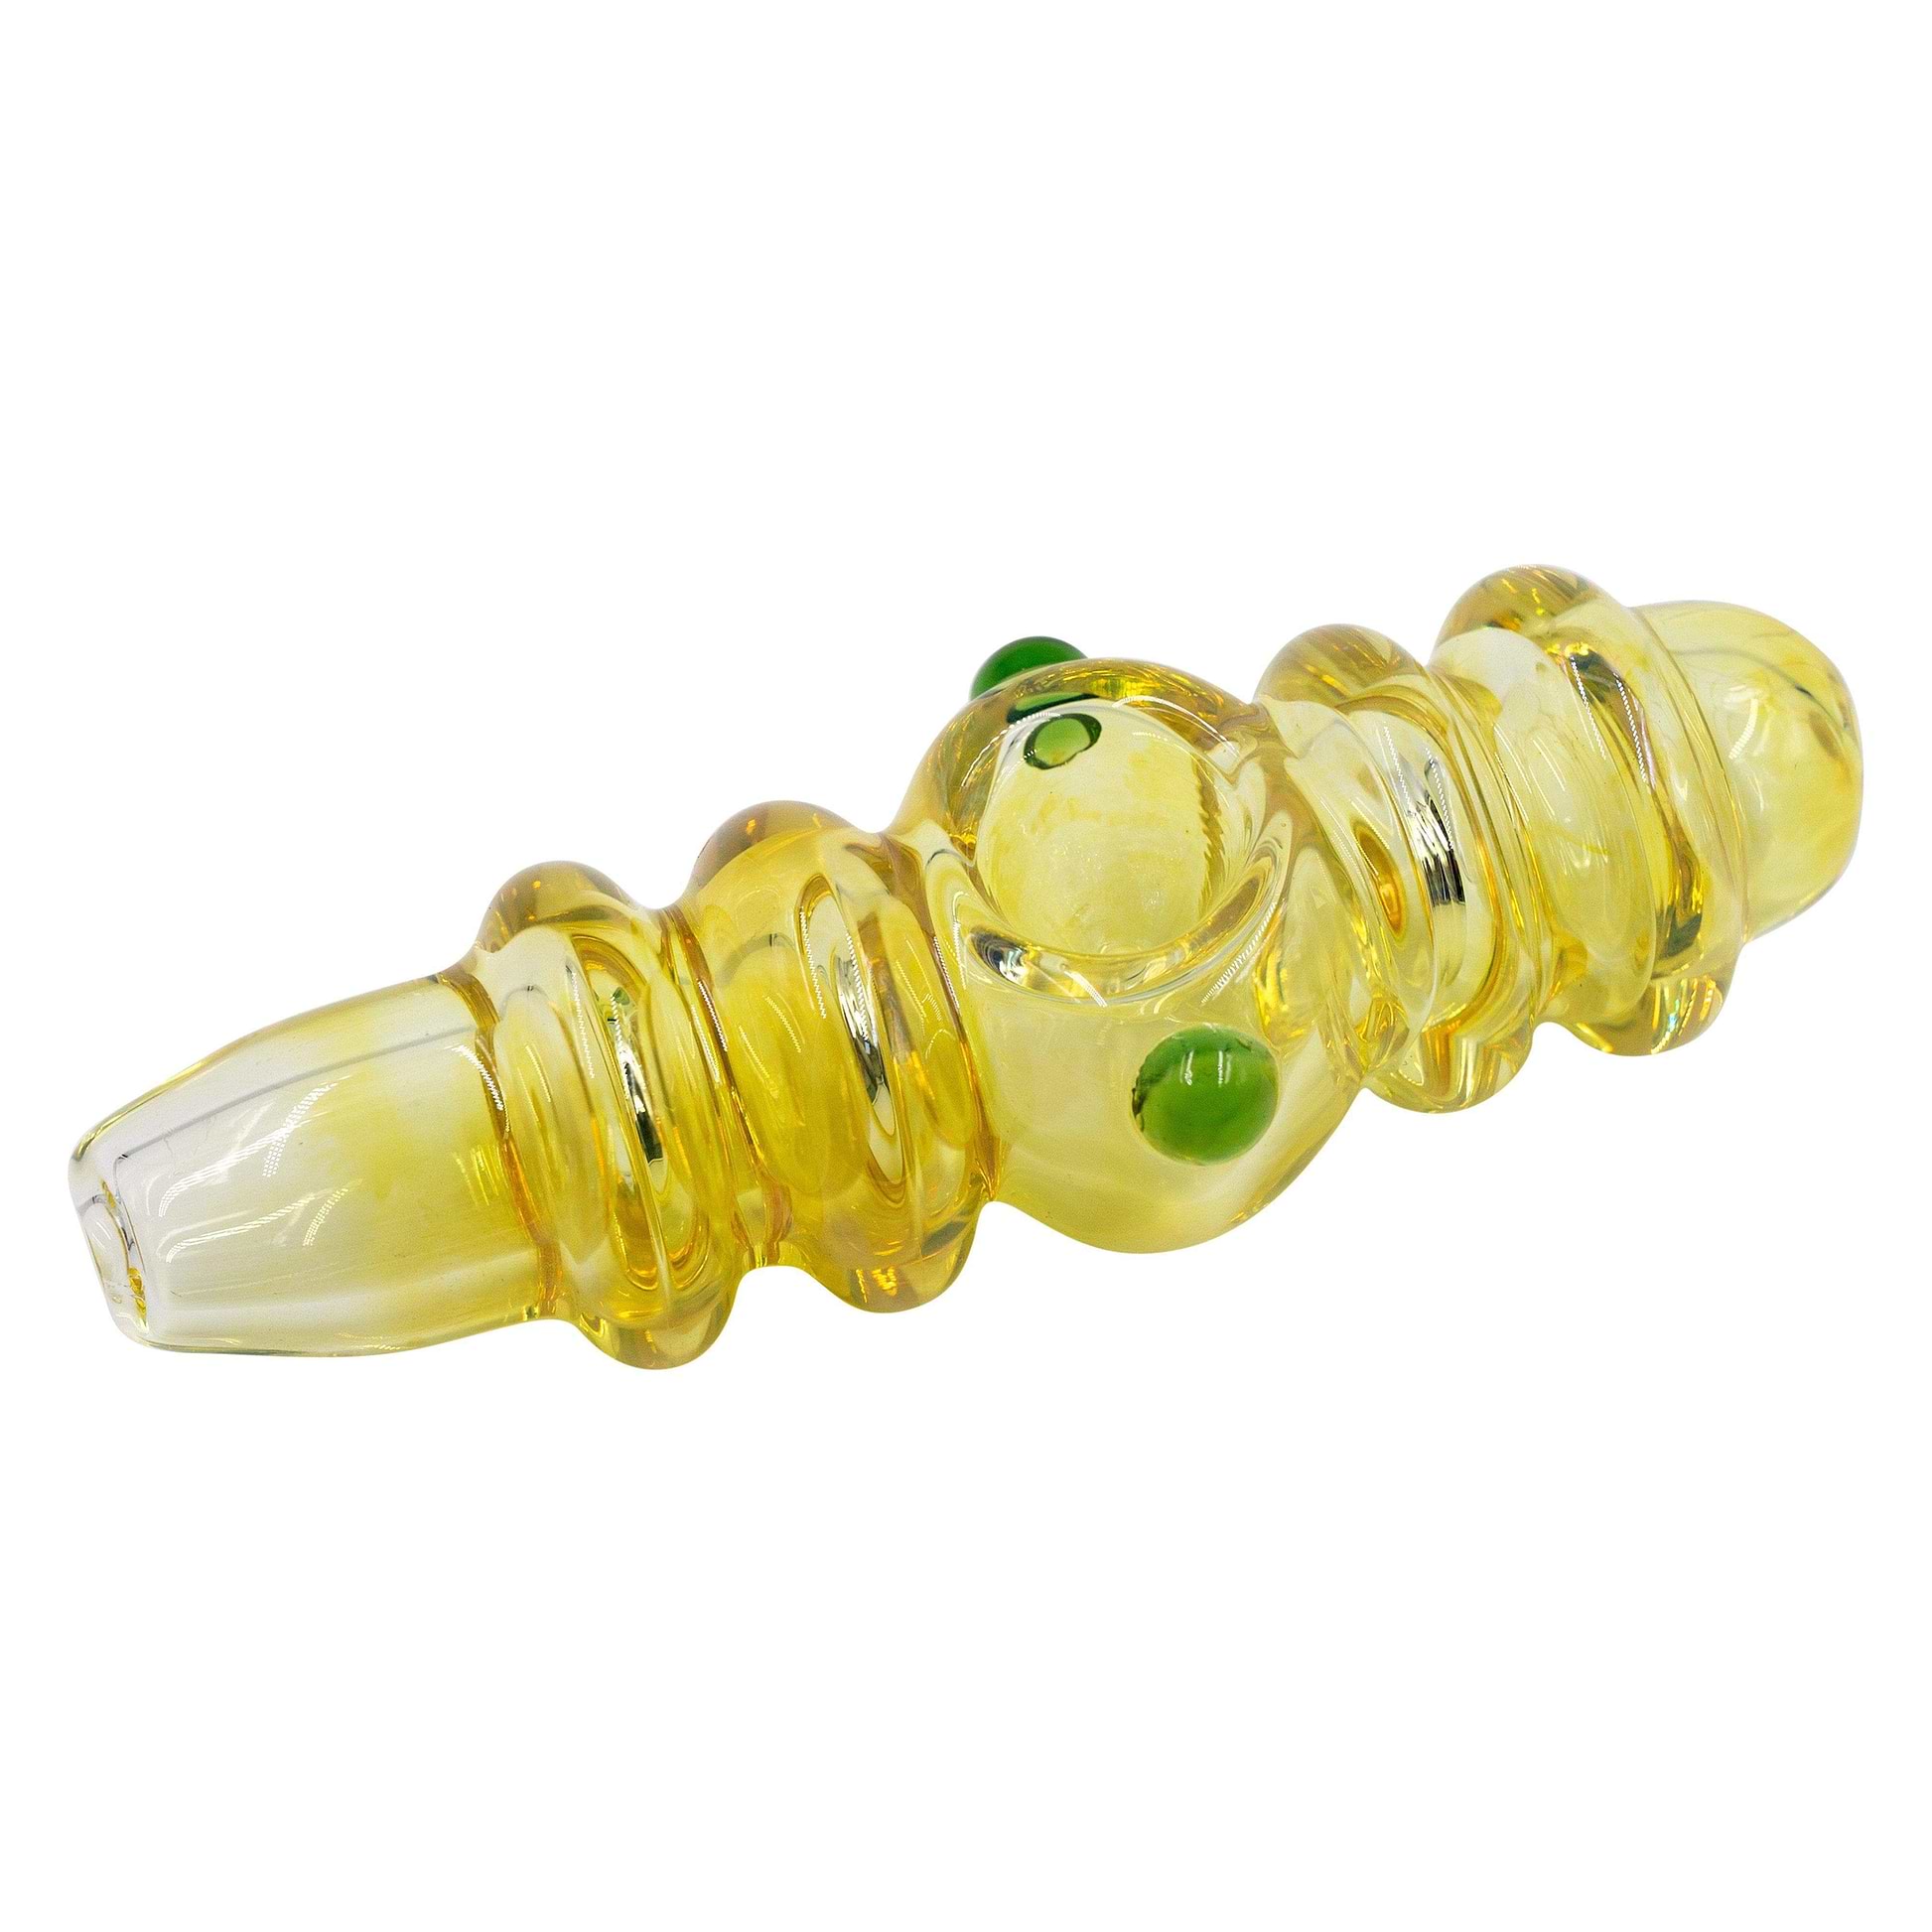 4.5-inch compact classic steamroller pipe smoking device center bowl layered multicolored swirling lines layered design